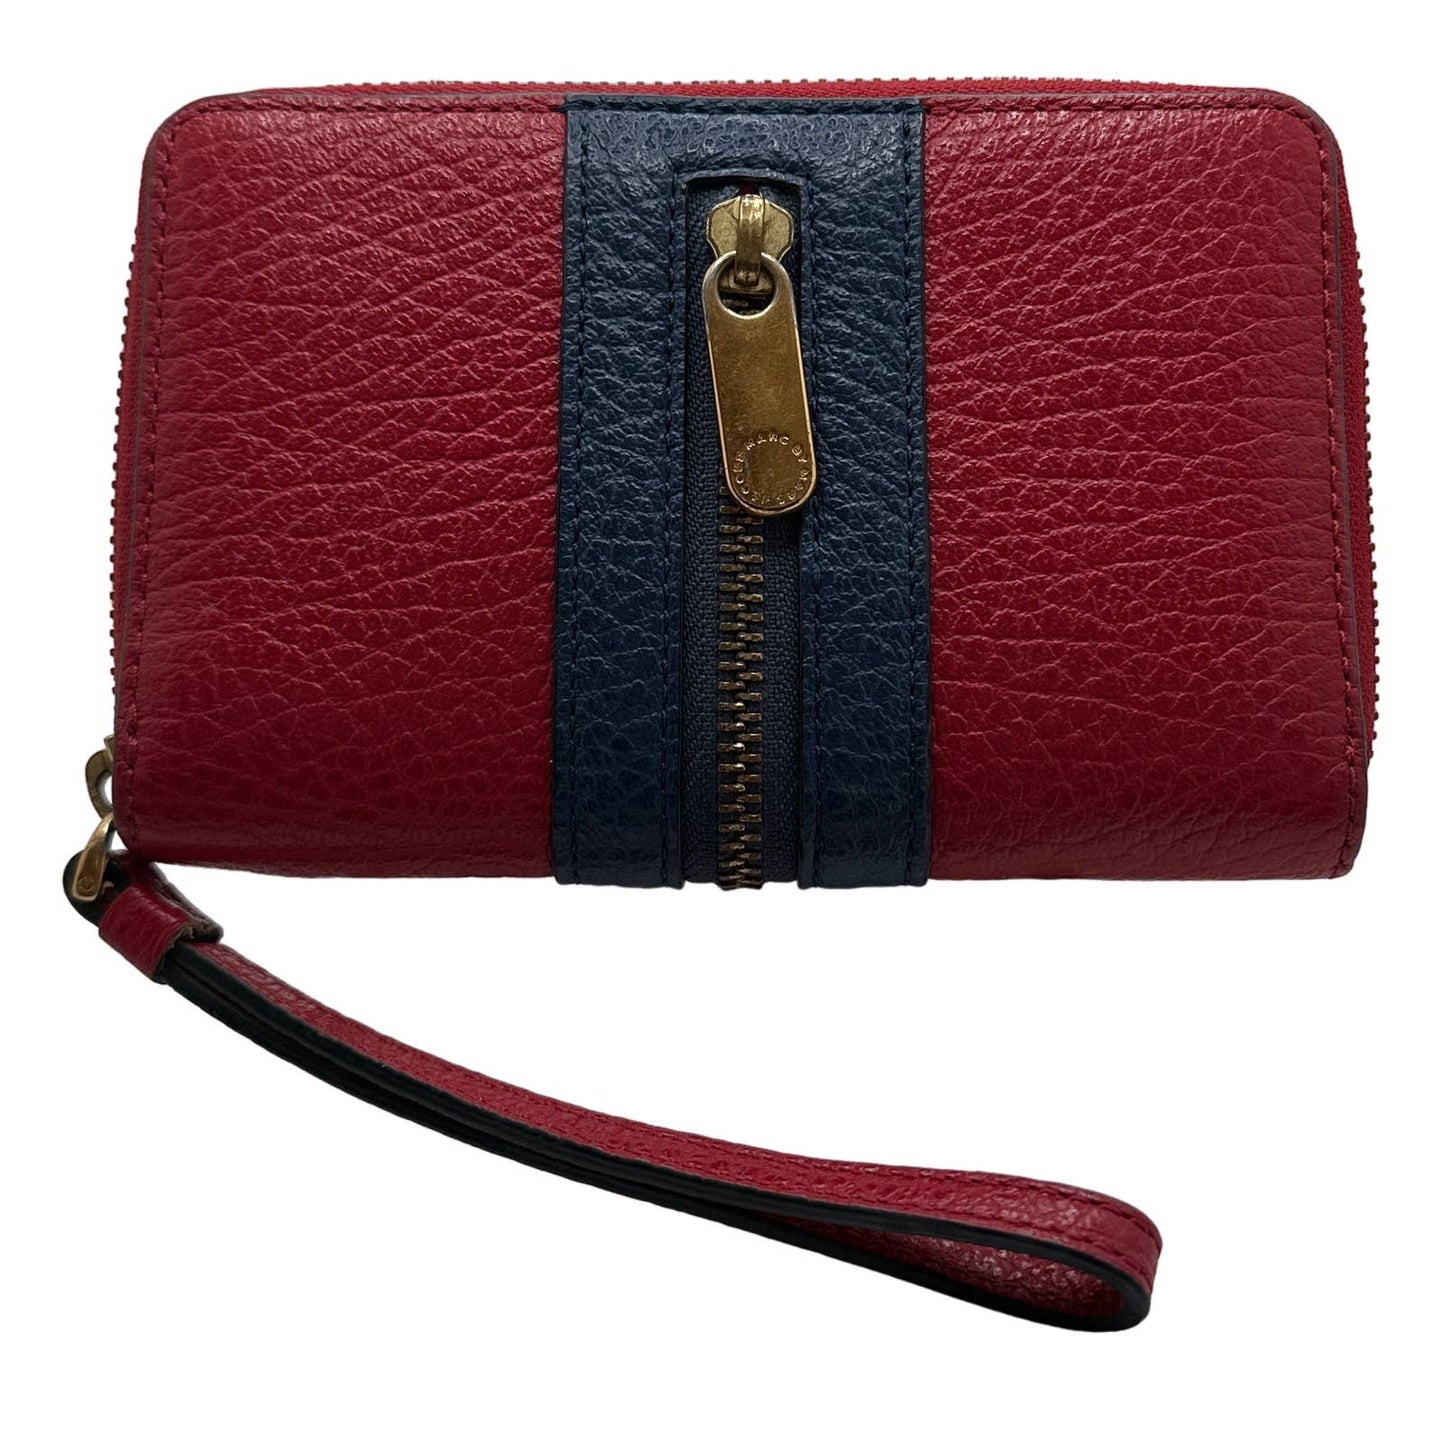 MARC by MARC JACOBS Zip Around Wallet / w Wristlet